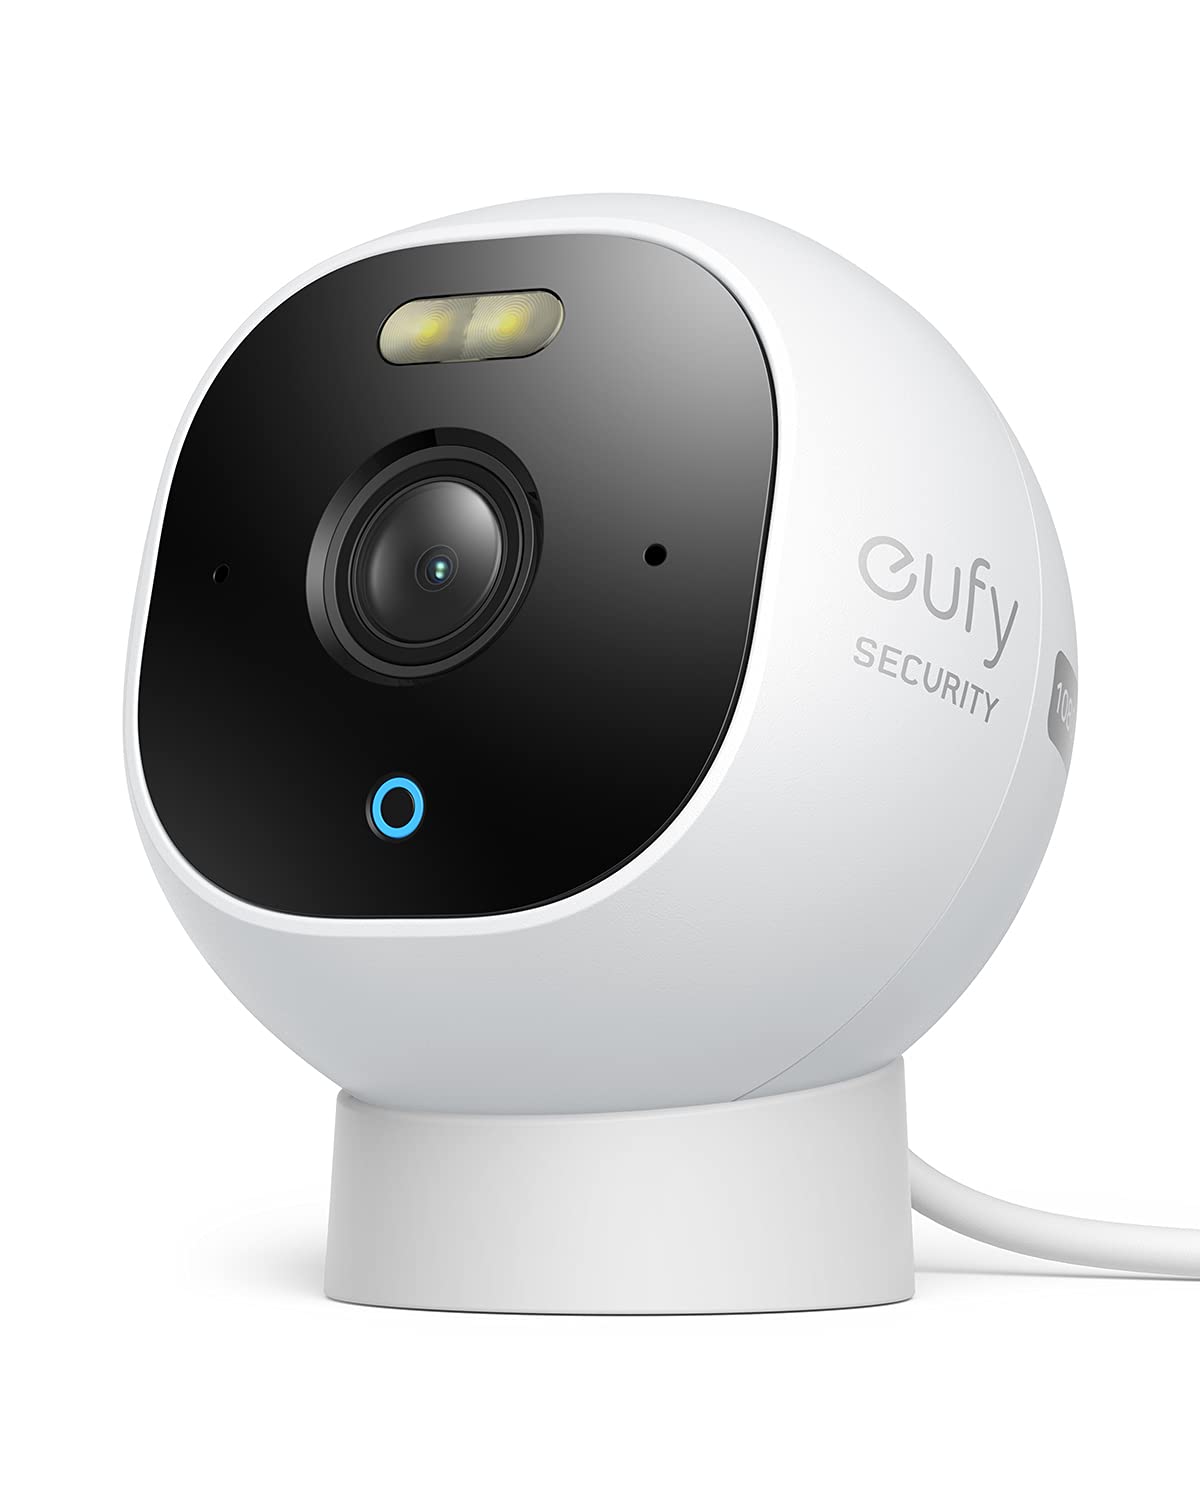 eufy Security All-in-One Outdoor Security Camera with 1080p Resolution $59.99